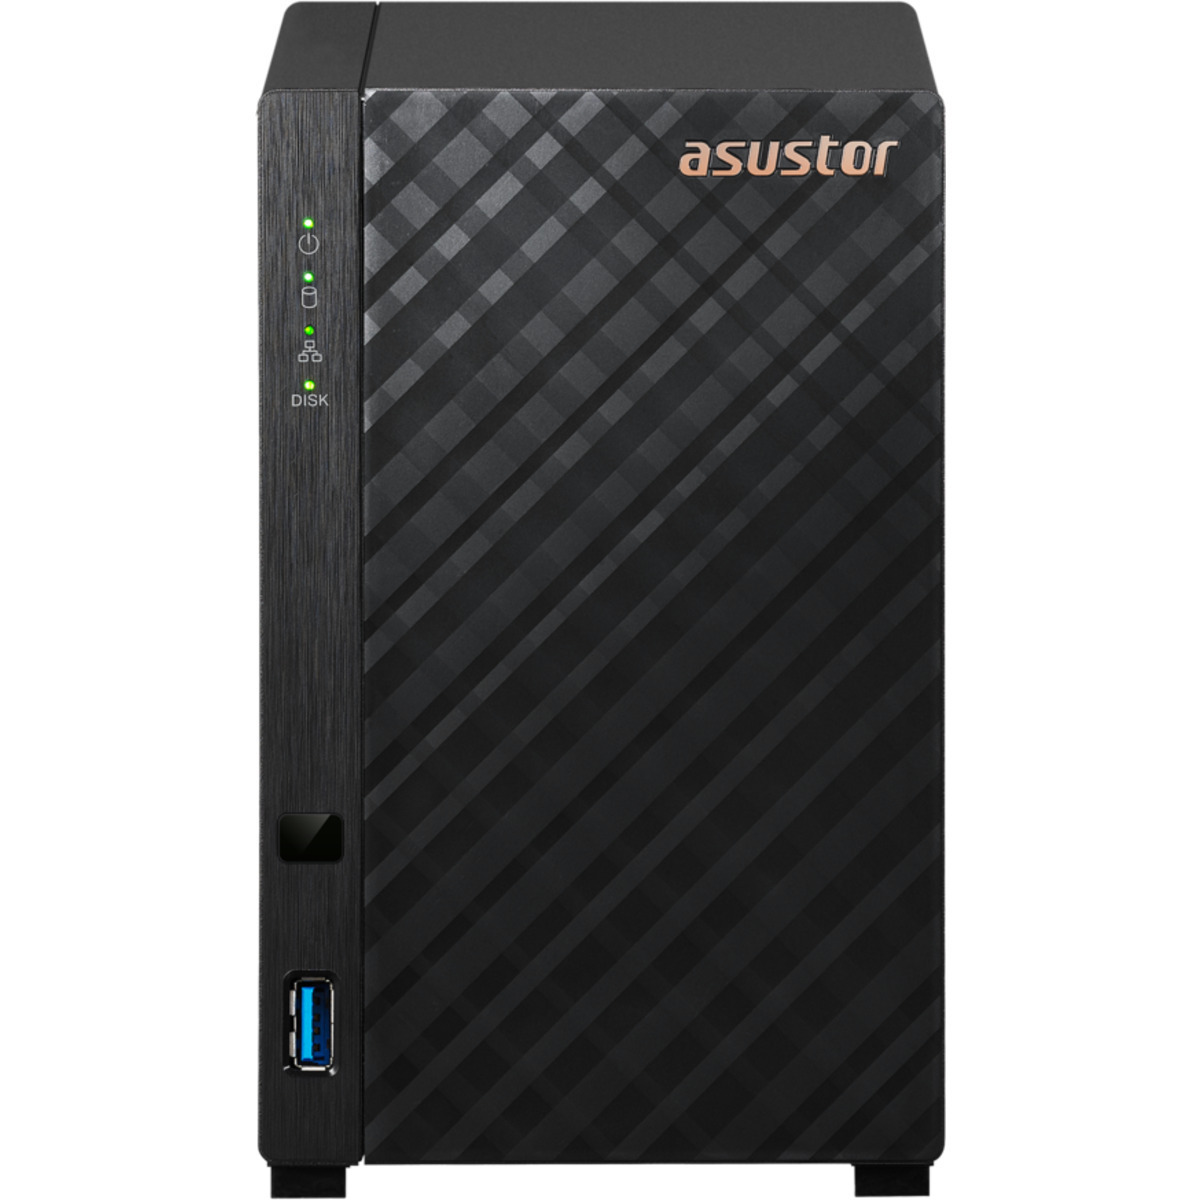 ASUSTOR DRIVESTOR 2 Lite AS1102TL 2tb 2-Bay Desktop Personal / Basic Home / Small Office NAS - Network Attached Storage Device 2x1tb Western Digital Red SA500 WDS100T1R0A 2.5 560/530MB/s SATA 6Gb/s SSD NAS Class Drives Installed - Burn-In Tested DRIVESTOR 2 Lite AS1102TL